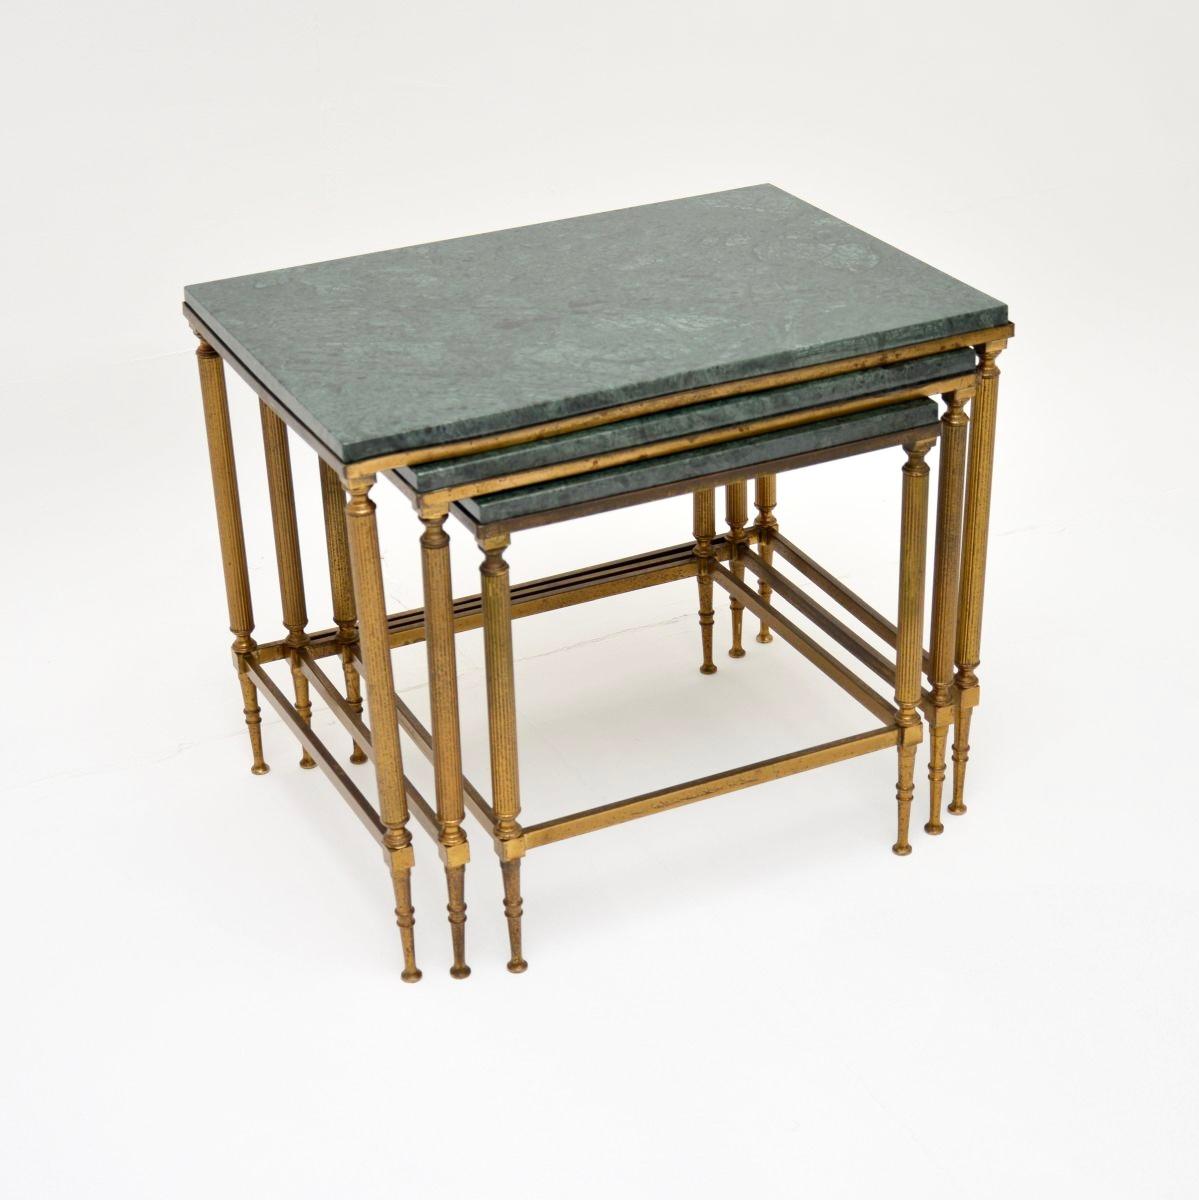 A fantastic vintage French brass and marble nest of tables, dating from the 1960-70’s.

They are of superb quality and have a very practical design. The tables nest under one another nicely, each has a beautifully constructed solid brass frame with